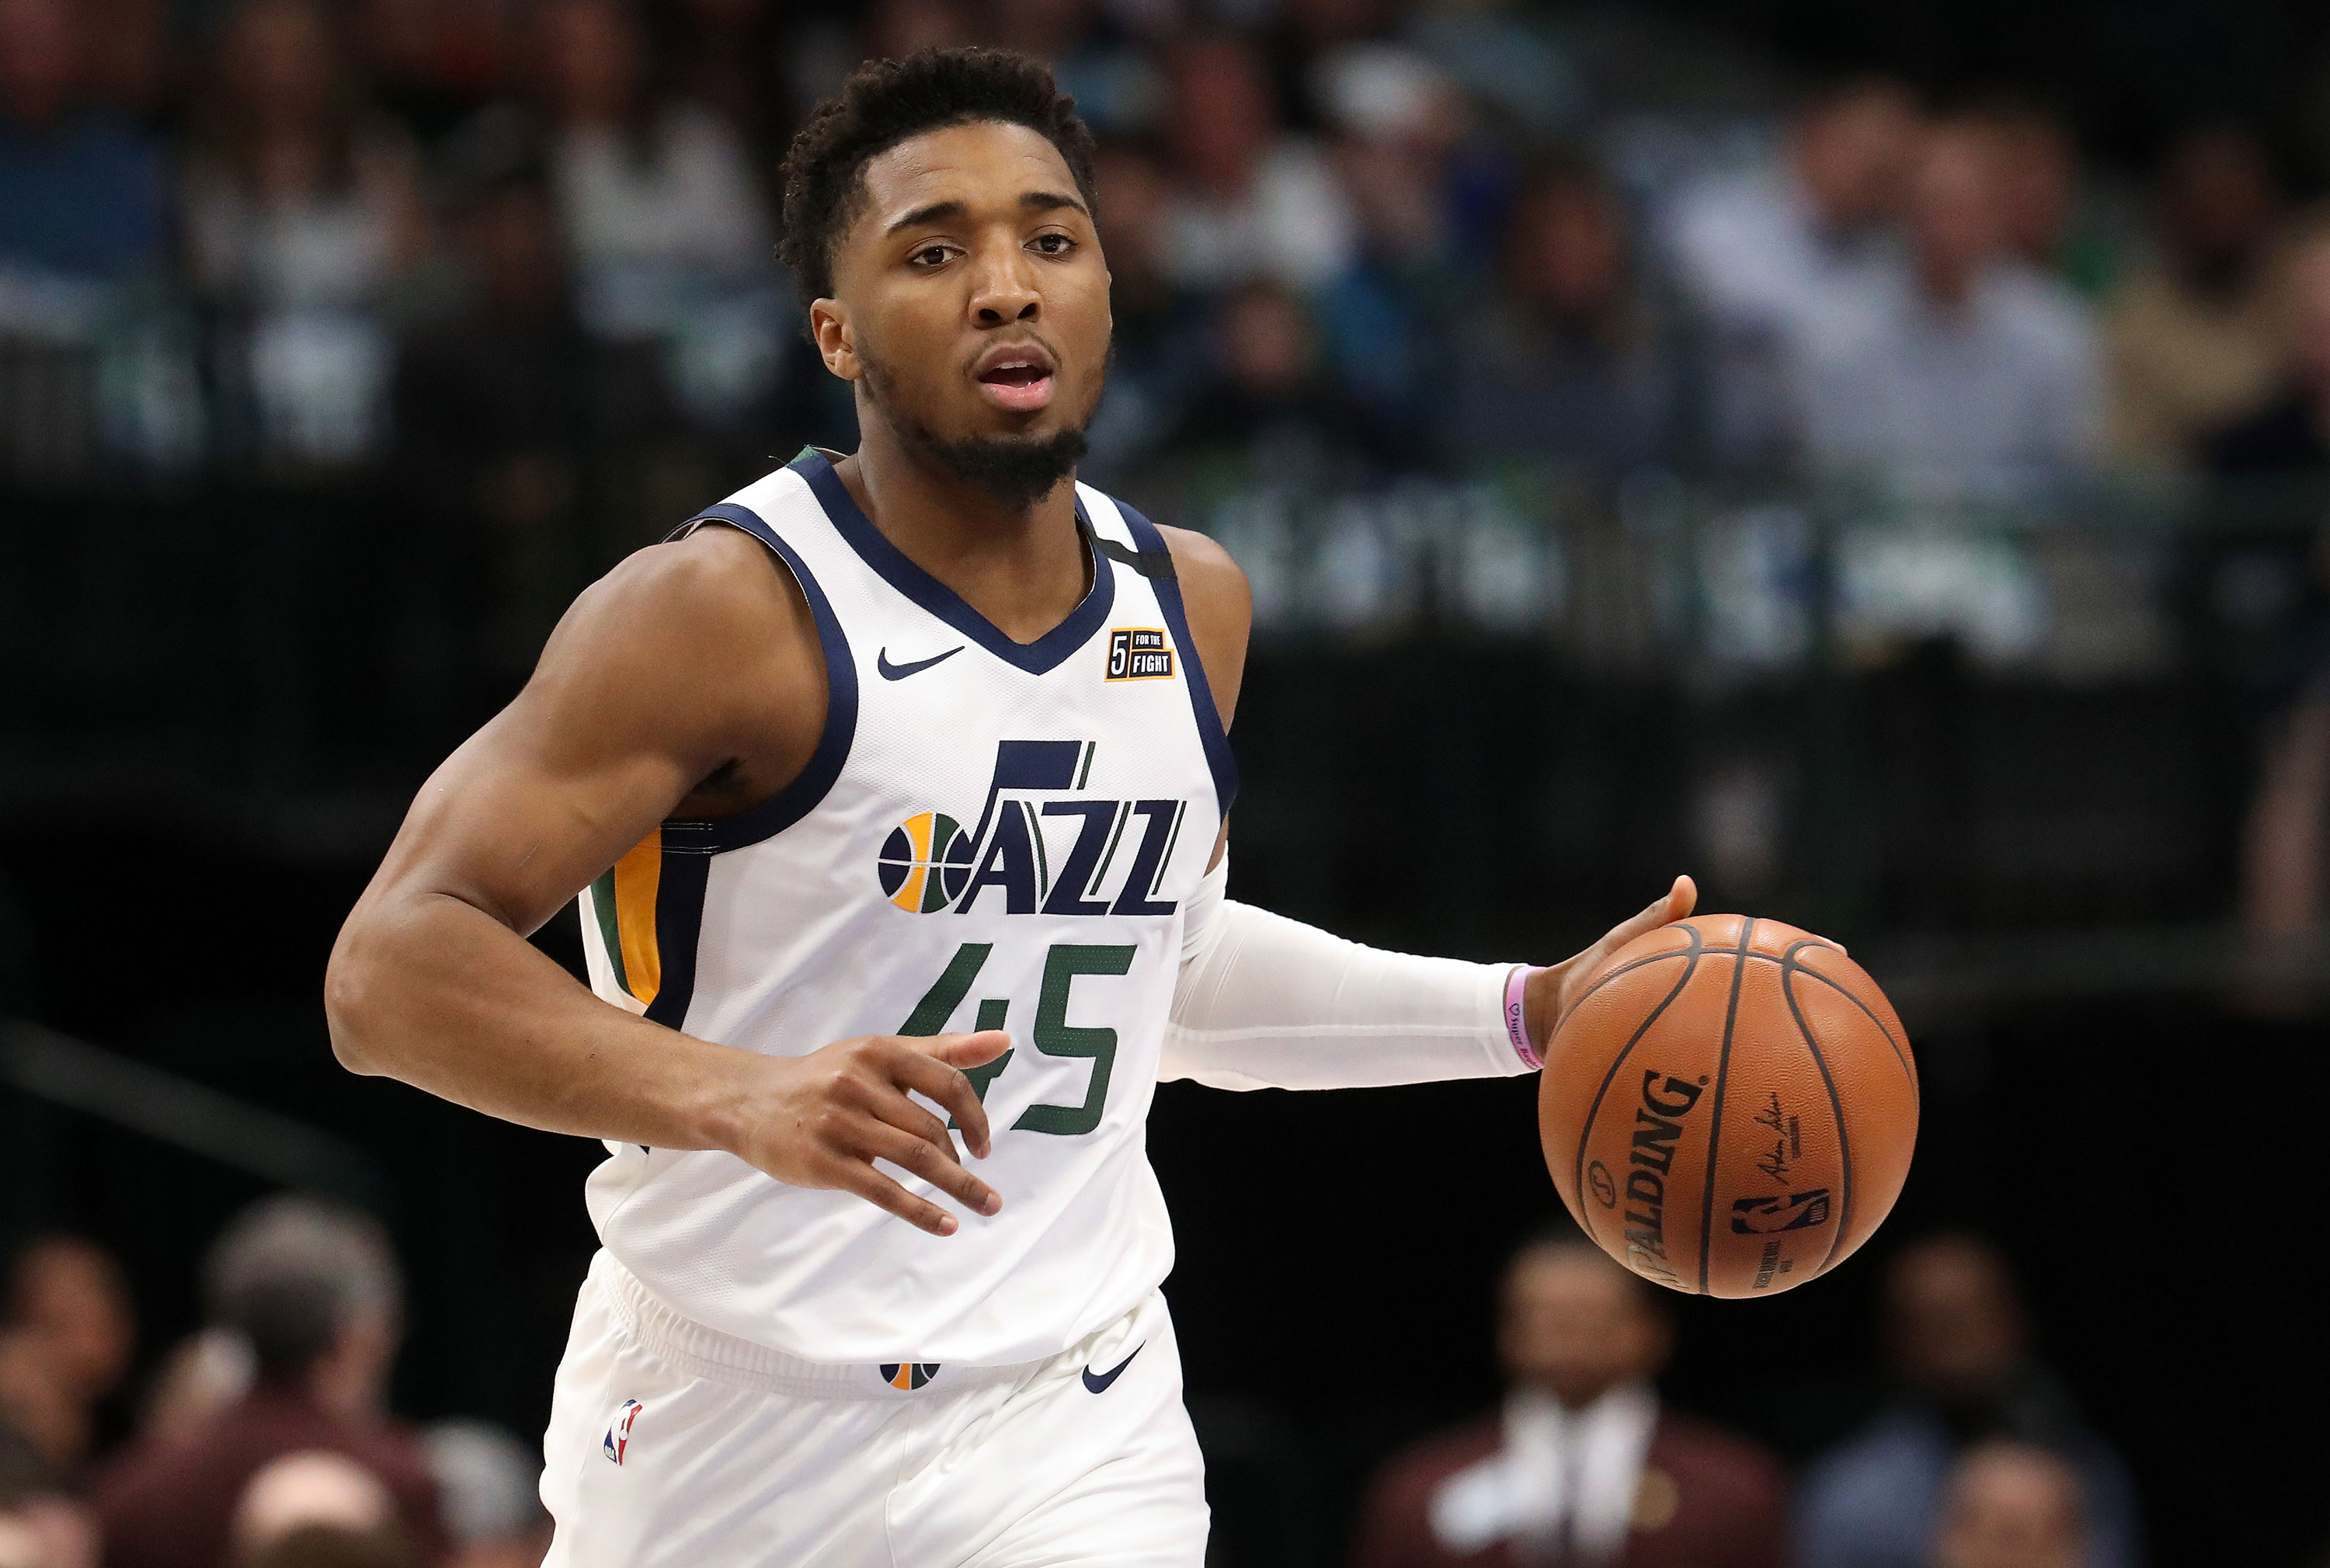 Donovan Mitchell of the Utah Jazz plays in a game at the American Airlines Center on February 10 in Dallas, Texas.